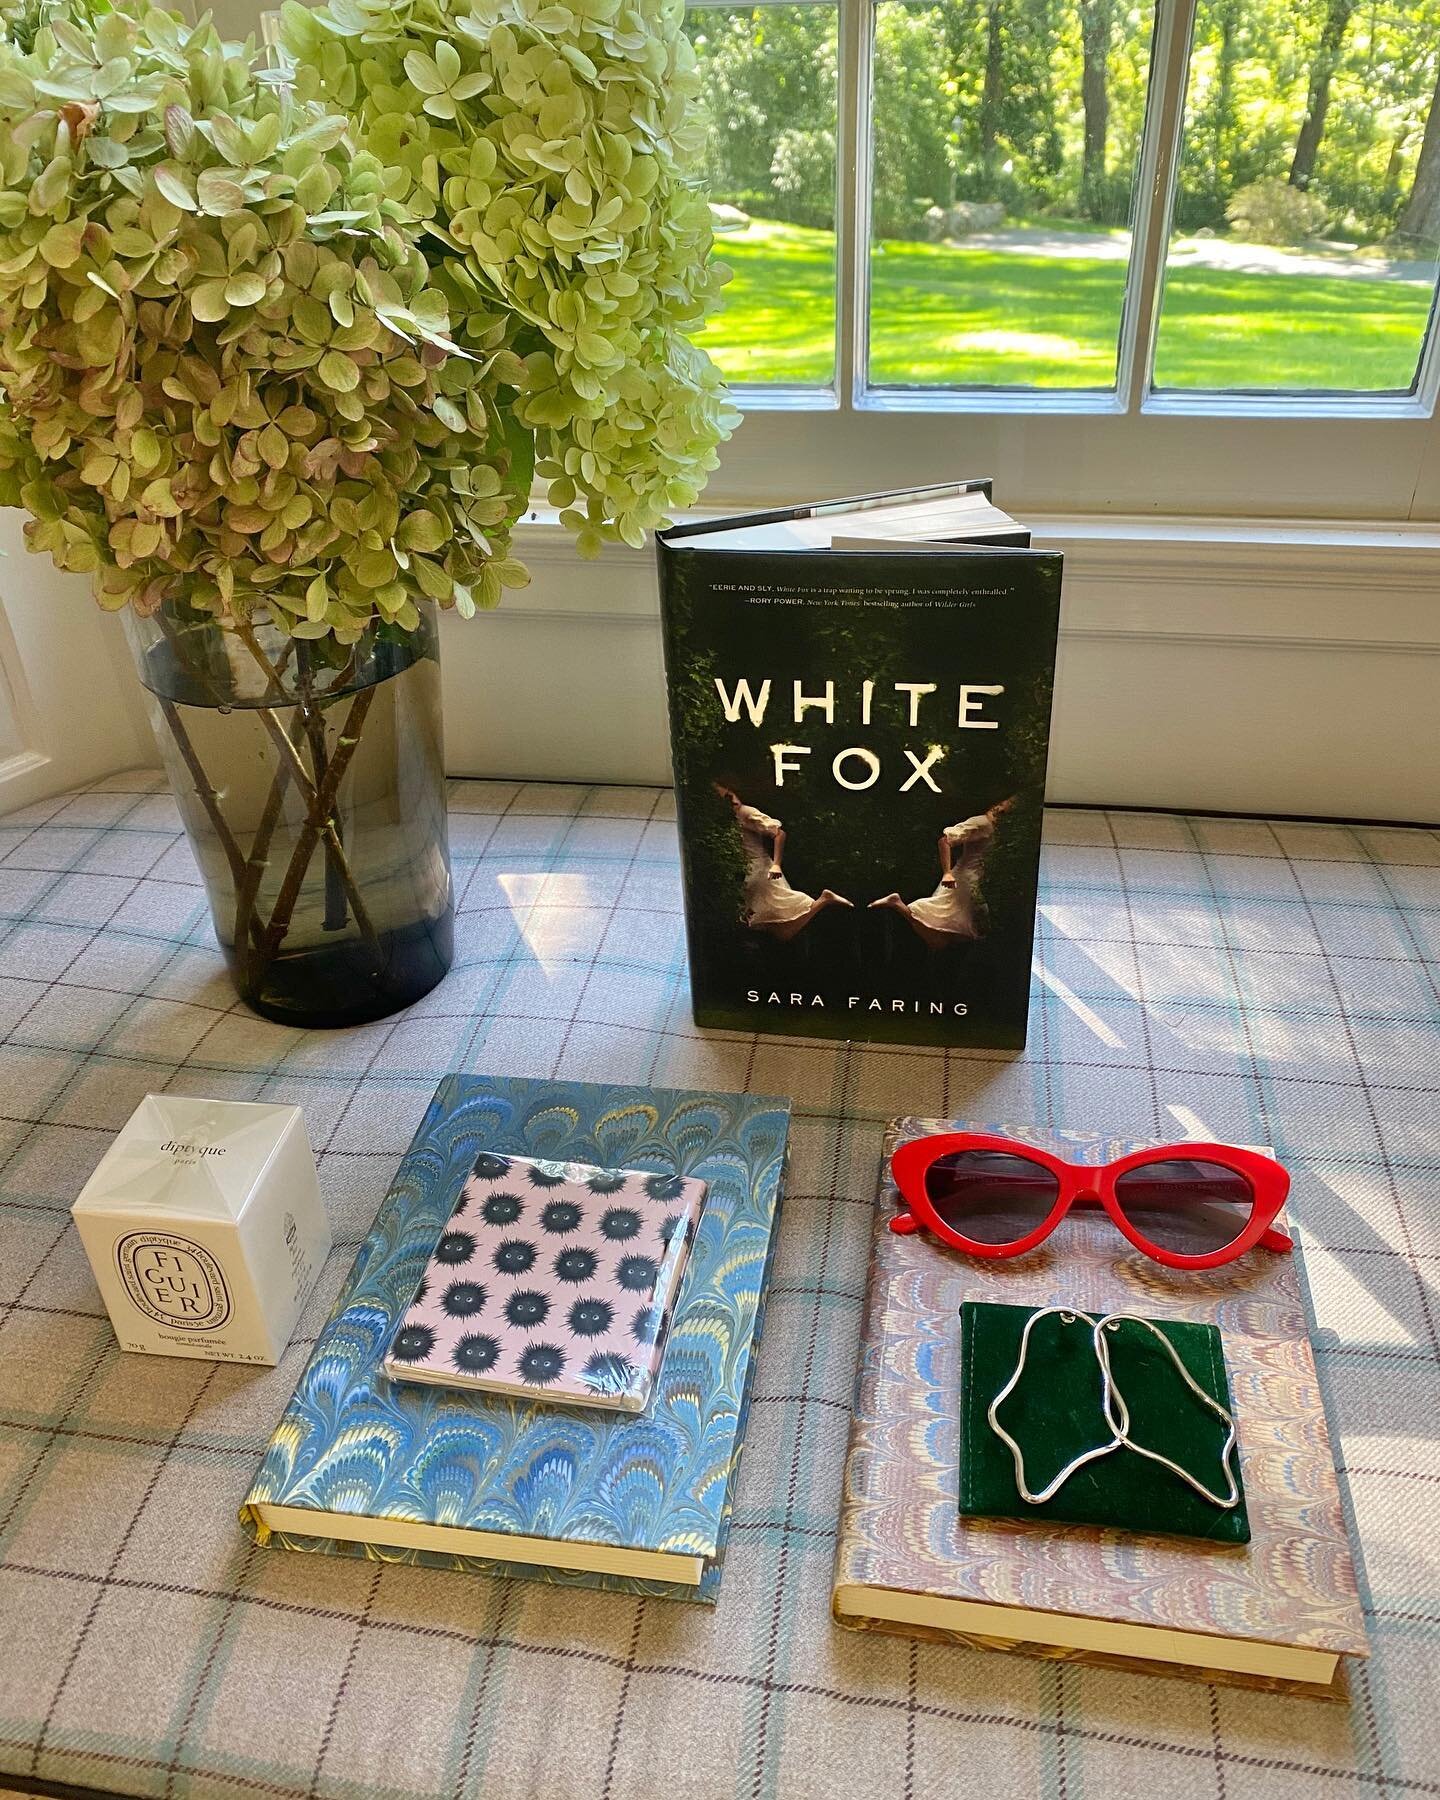 ✨Giveaway!✨

🥂To celebrate the release of White Fox this week, I put together a gift package of some of Tai&rsquo;s &amp; Noni&rsquo;s favorite things, and @fiercereads is helping me surprise a lucky winner with it all...

🌟The winner will receive 